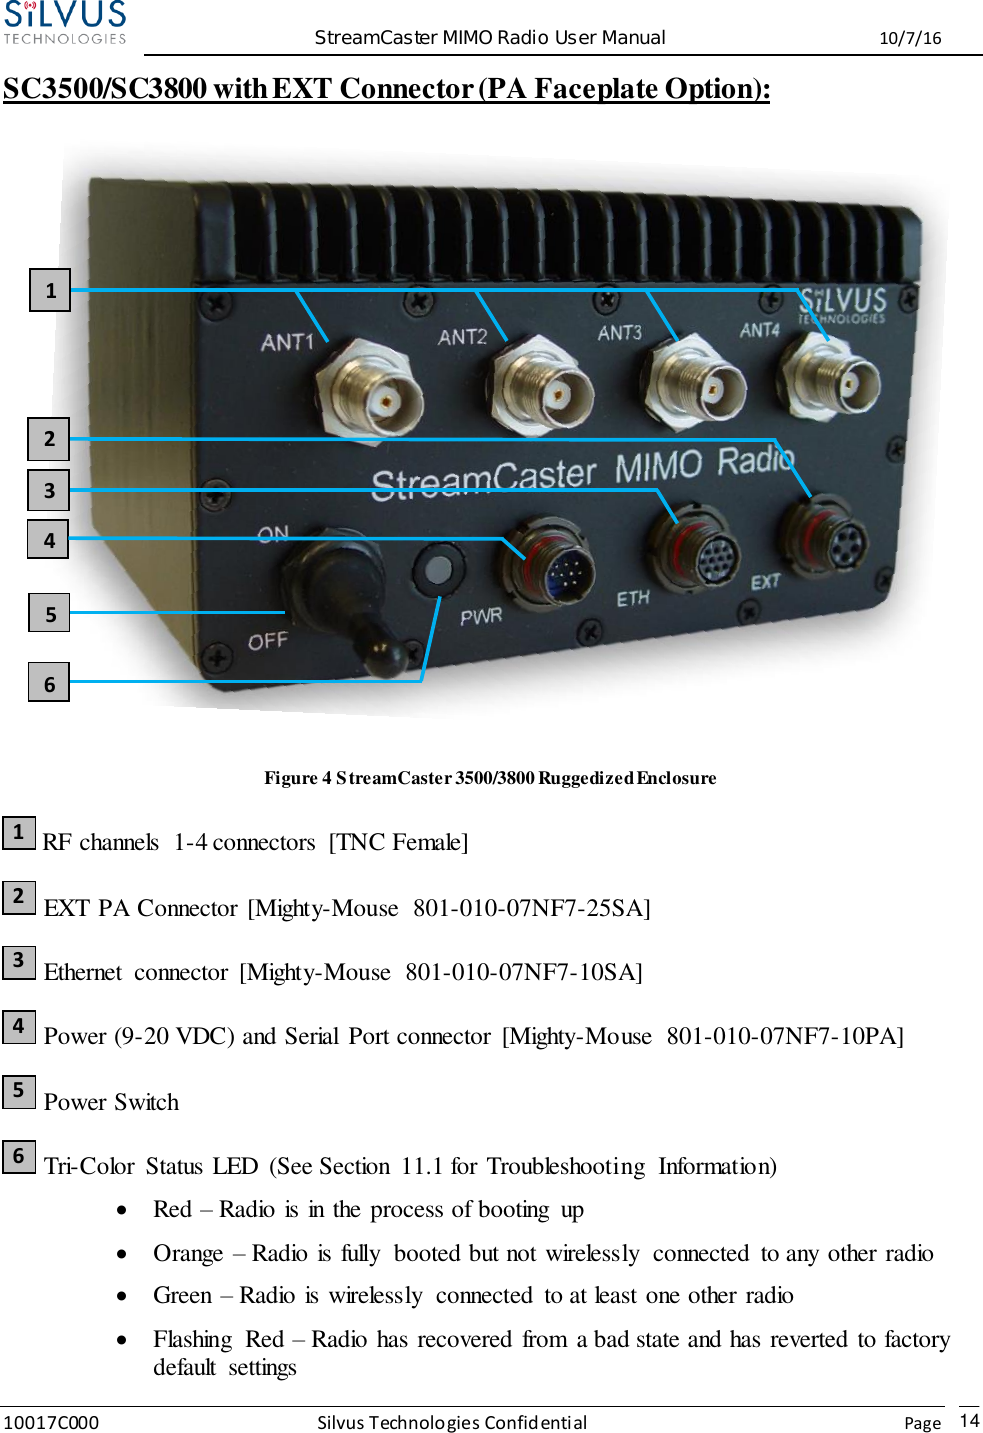  StreamCaster MIMO Radio User Manual  10/7/16 10017C000 Silvus Technologies Confidential    Page   14 SC3500/SC3800 with EXT Connector (PA Faceplate Option):    Figure 4 StreamCaster 3500/3800 Ruggedized Enclosure  RF channels  1-4 connectors  [TNC Female]  EXT PA Connector [Mighty-Mouse  801-010-07NF7-25SA]  Ethernet  connector  [Mighty-Mouse  801-010-07NF7-10SA]  Power (9-20 VDC) and Serial  Port connector  [Mighty-Mouse  801-010-07NF7-10PA]  Power Switch  Tri-Color  Status LED  (See Section  11.1 for Troubleshooting  Information)  Red – Radio is in the process of booting  up  Orange – Radio is fully  booted but not wirelessly  connected  to any other radio  Green – Radio is wirelessly  connected  to at least one other radio  Flashing  Red – Radio has recovered from  a bad state and has reverted to factory default  settings 1 2 3 4 5 6 2 3 4 1 6 5 